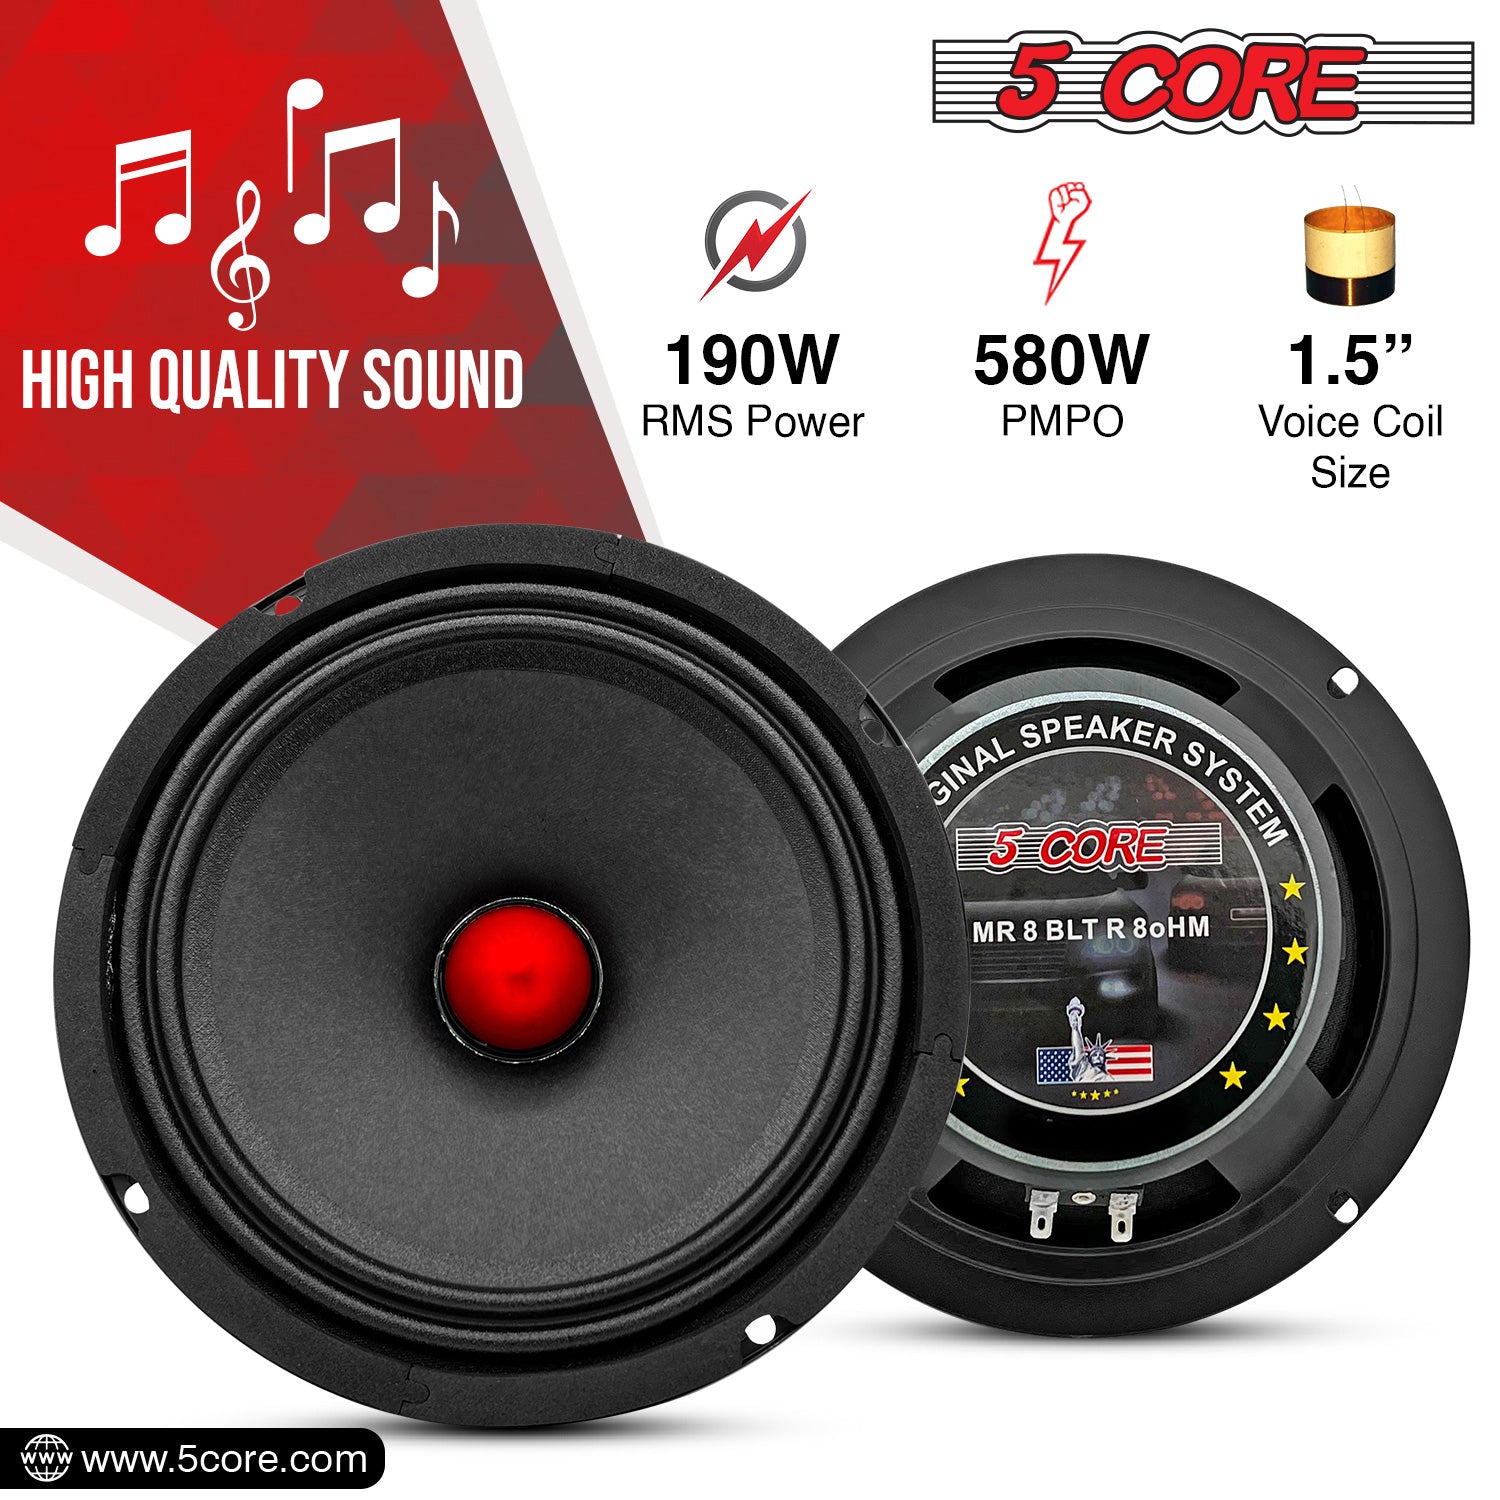 5 CORE 8 Inch Guitar Raw Speakers for Amplifier Cabinet 190W RMS 580W PMPO 8 Ohm